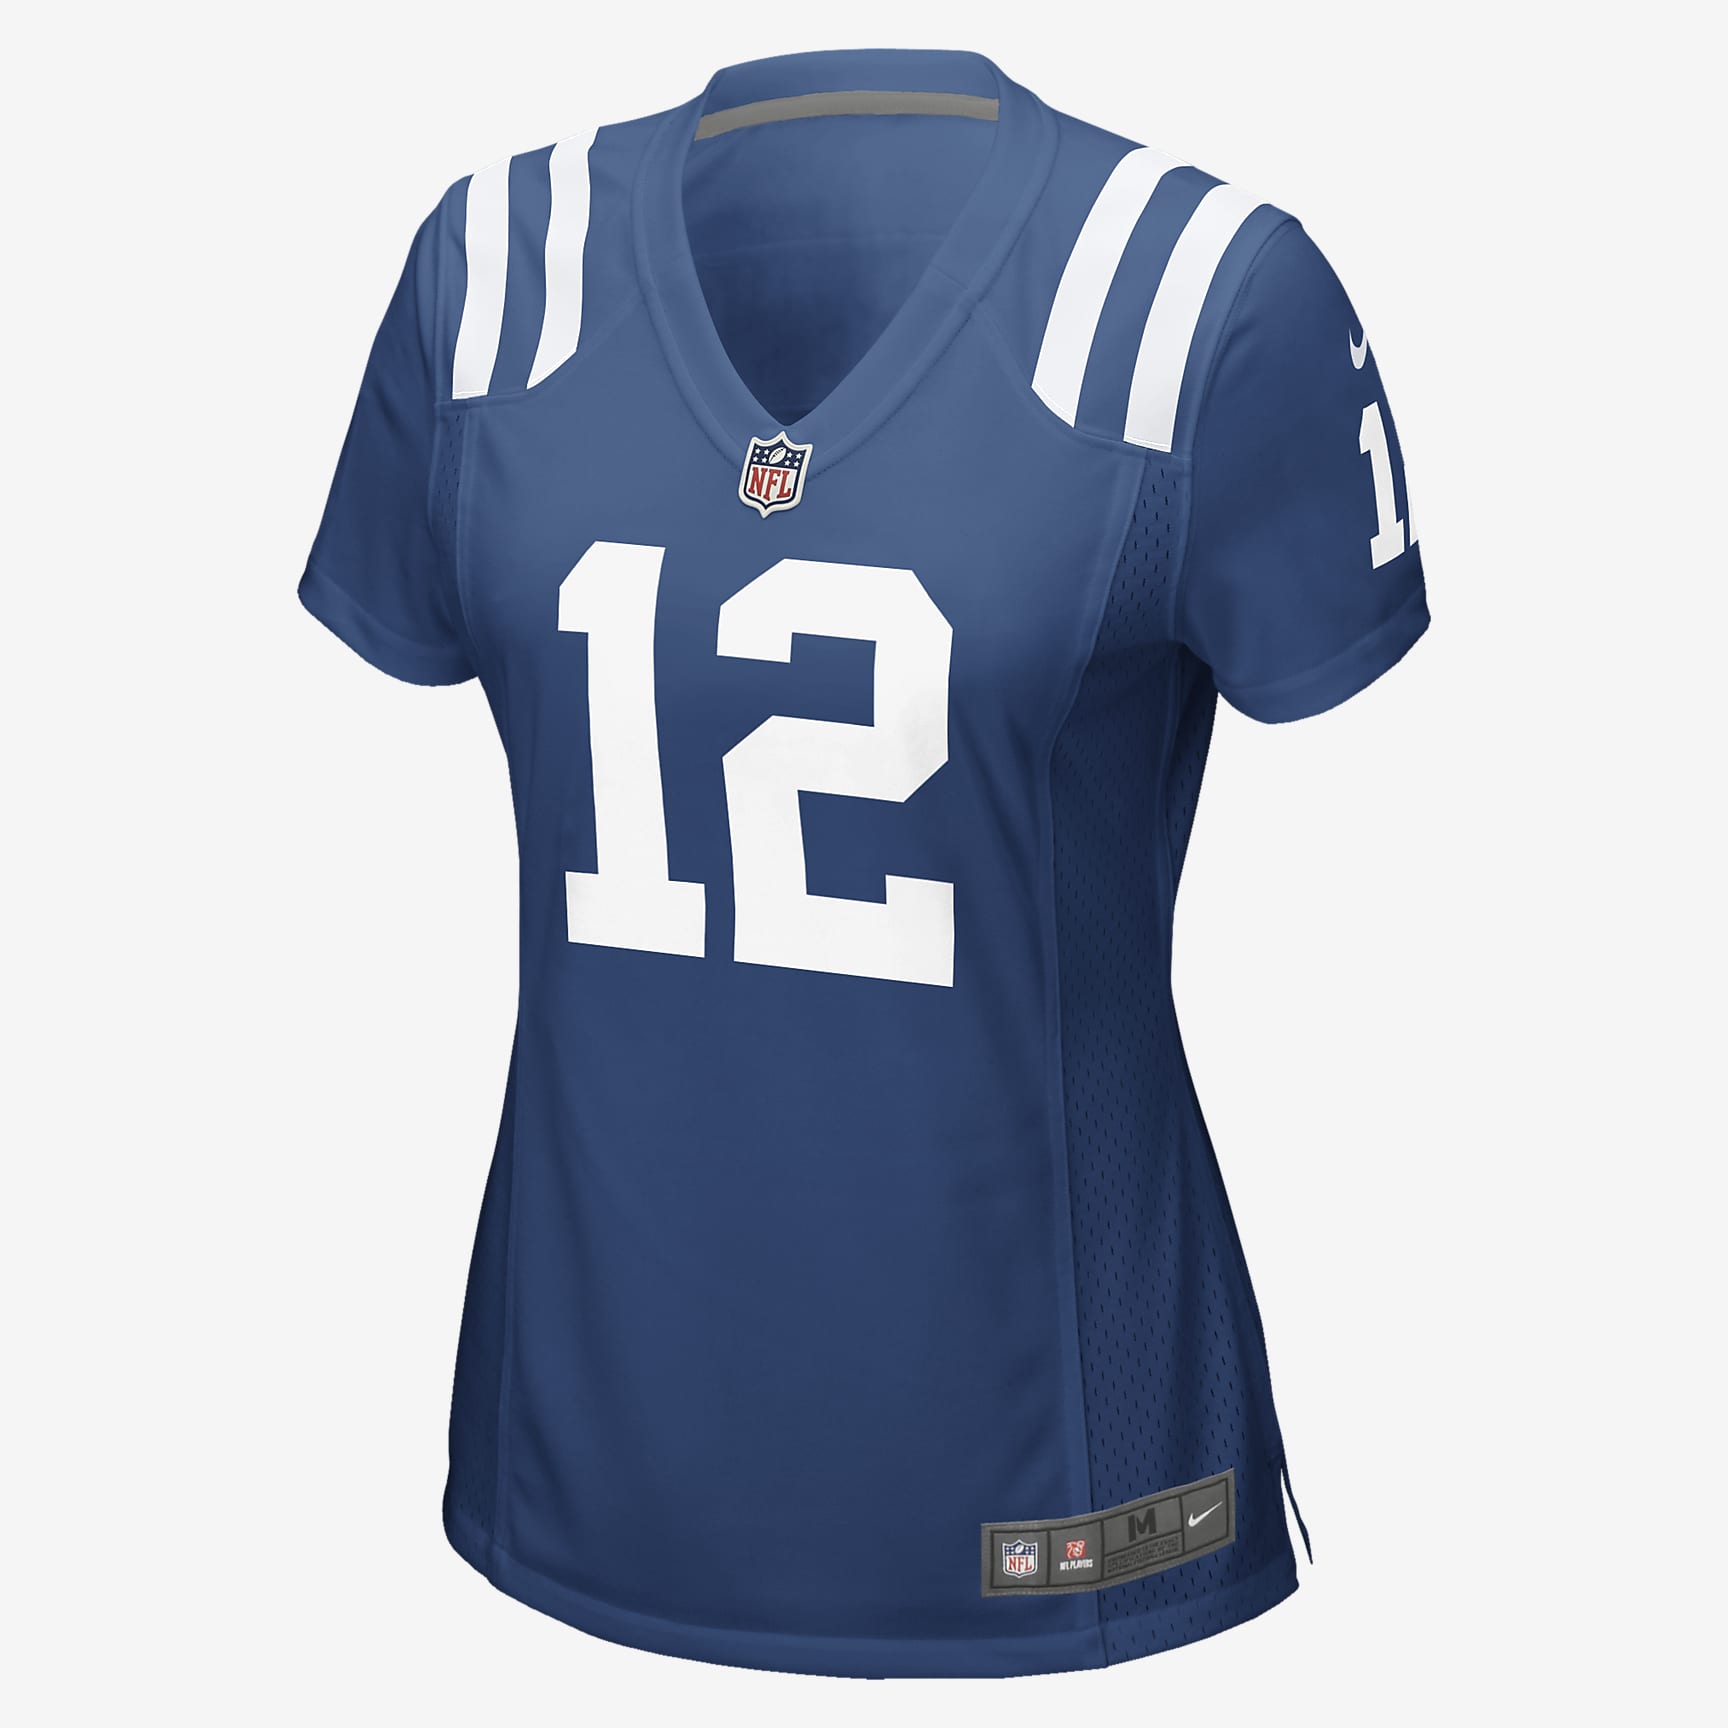 NFL Indianapolis Colts (Andrew Luck) Women's Game Football Jersey. Nike.com